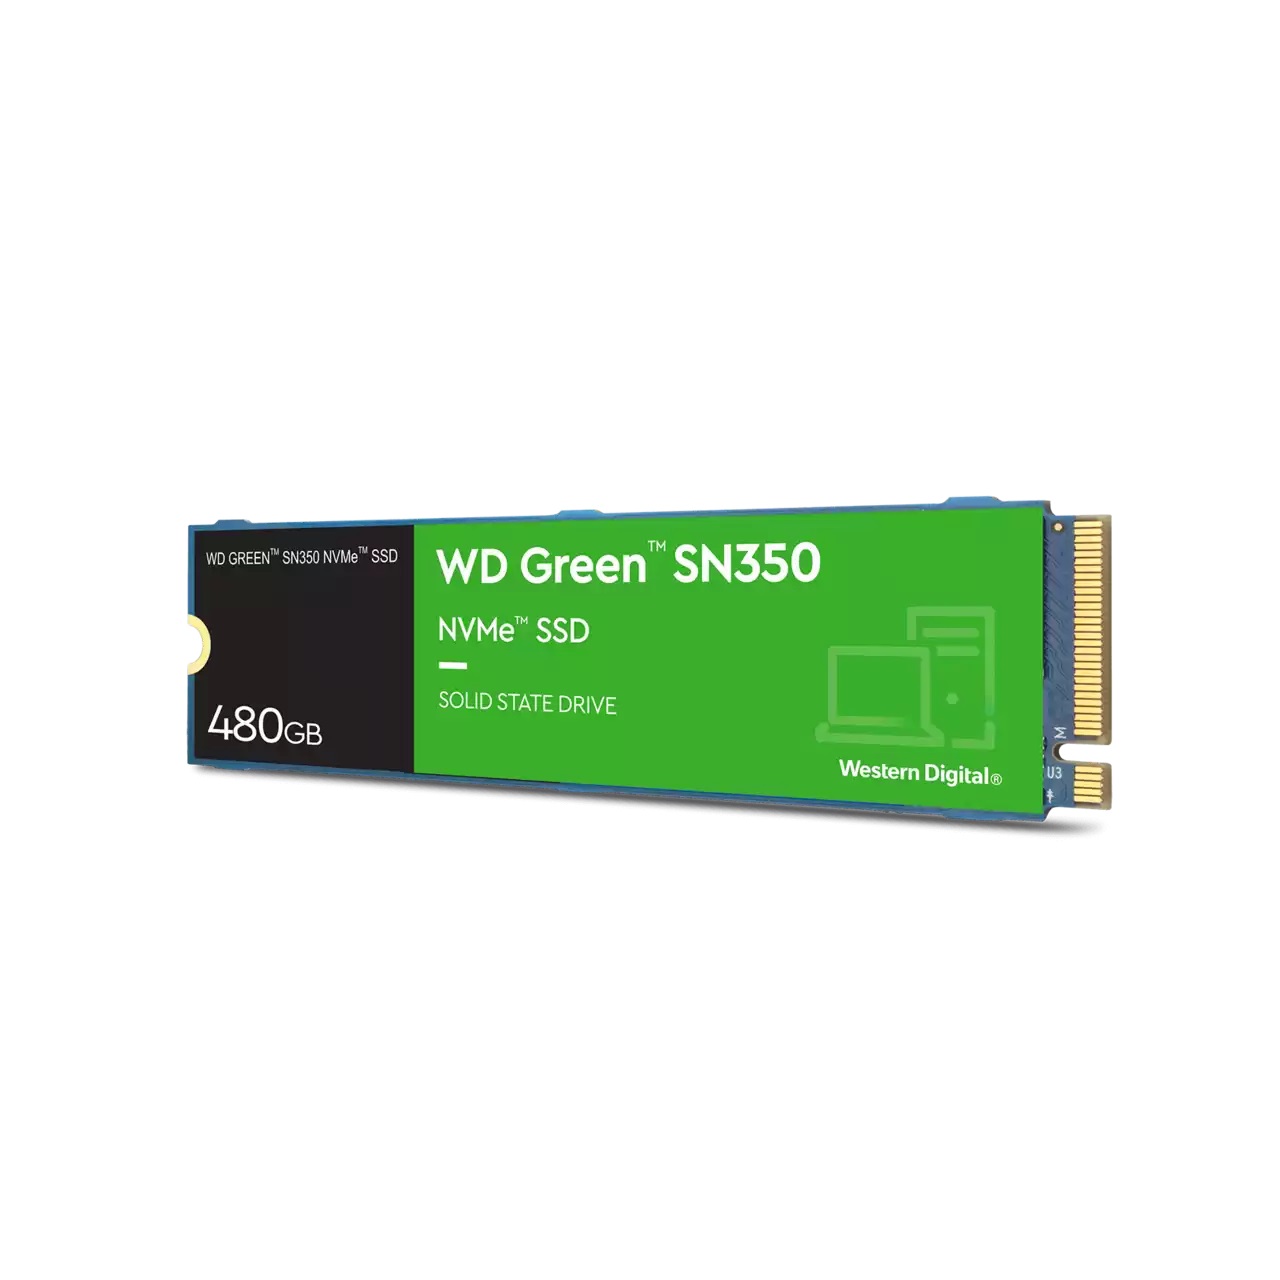 Western Digital WD Blue SN350 480G NVMe SSD 2400MB/s 1650MB/s R/W 60TBW 250/170K IOPS M.2 2280 PCIe Gen 4 1mil hrs MTBF - Click Image to Close